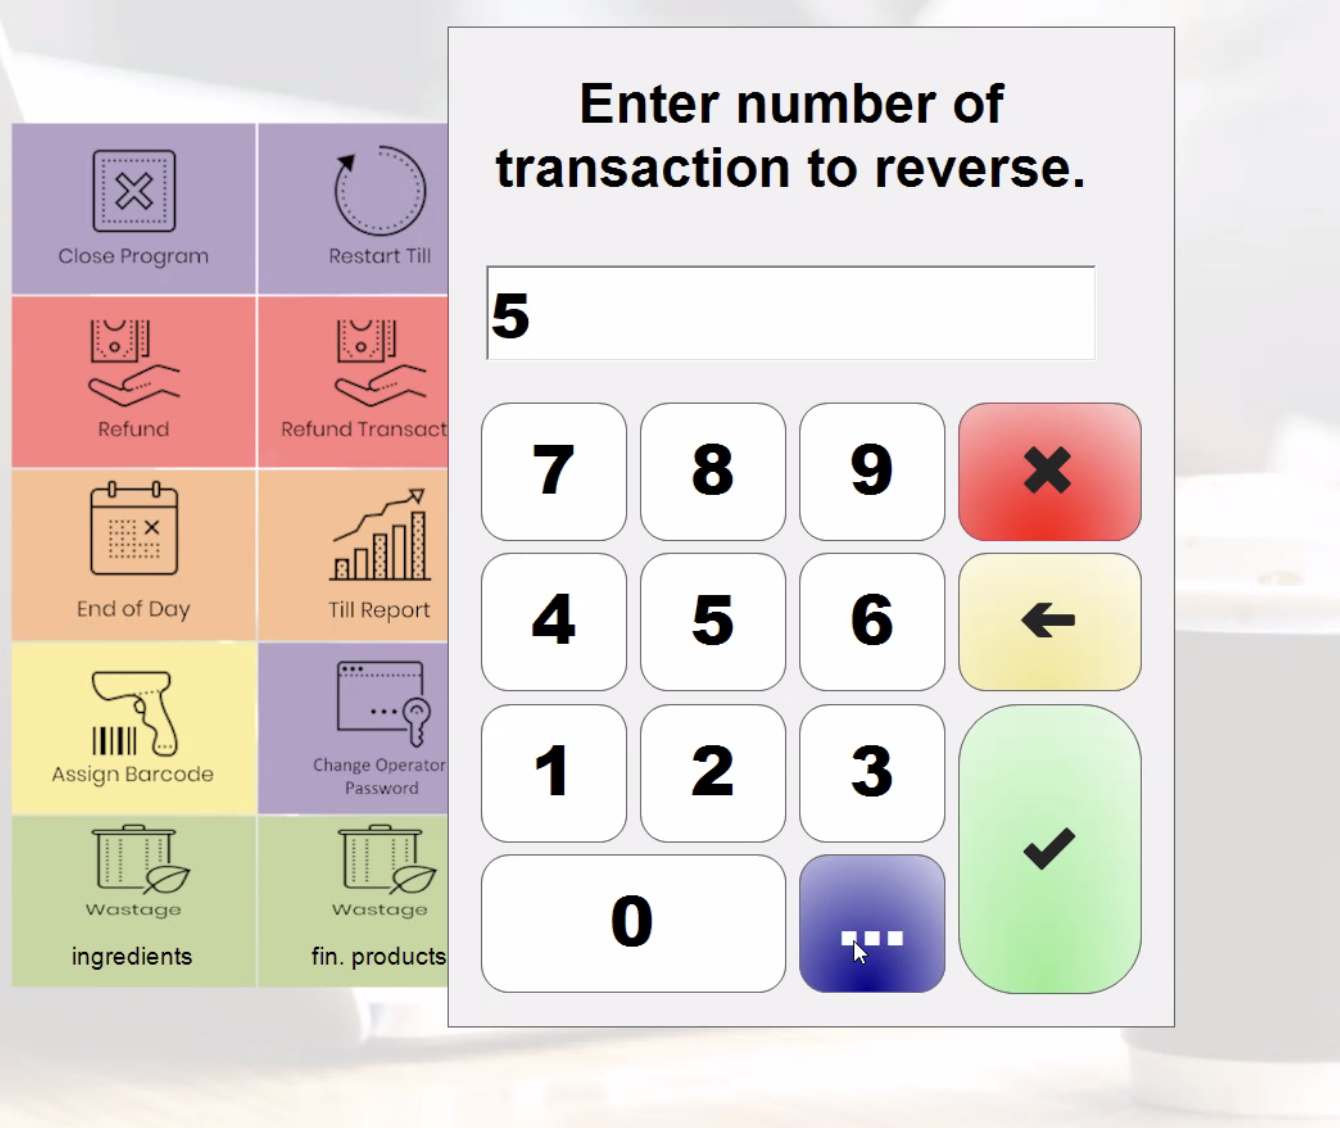 Transaction_number_on_receipt_or_3_dots_for_all_trans.png